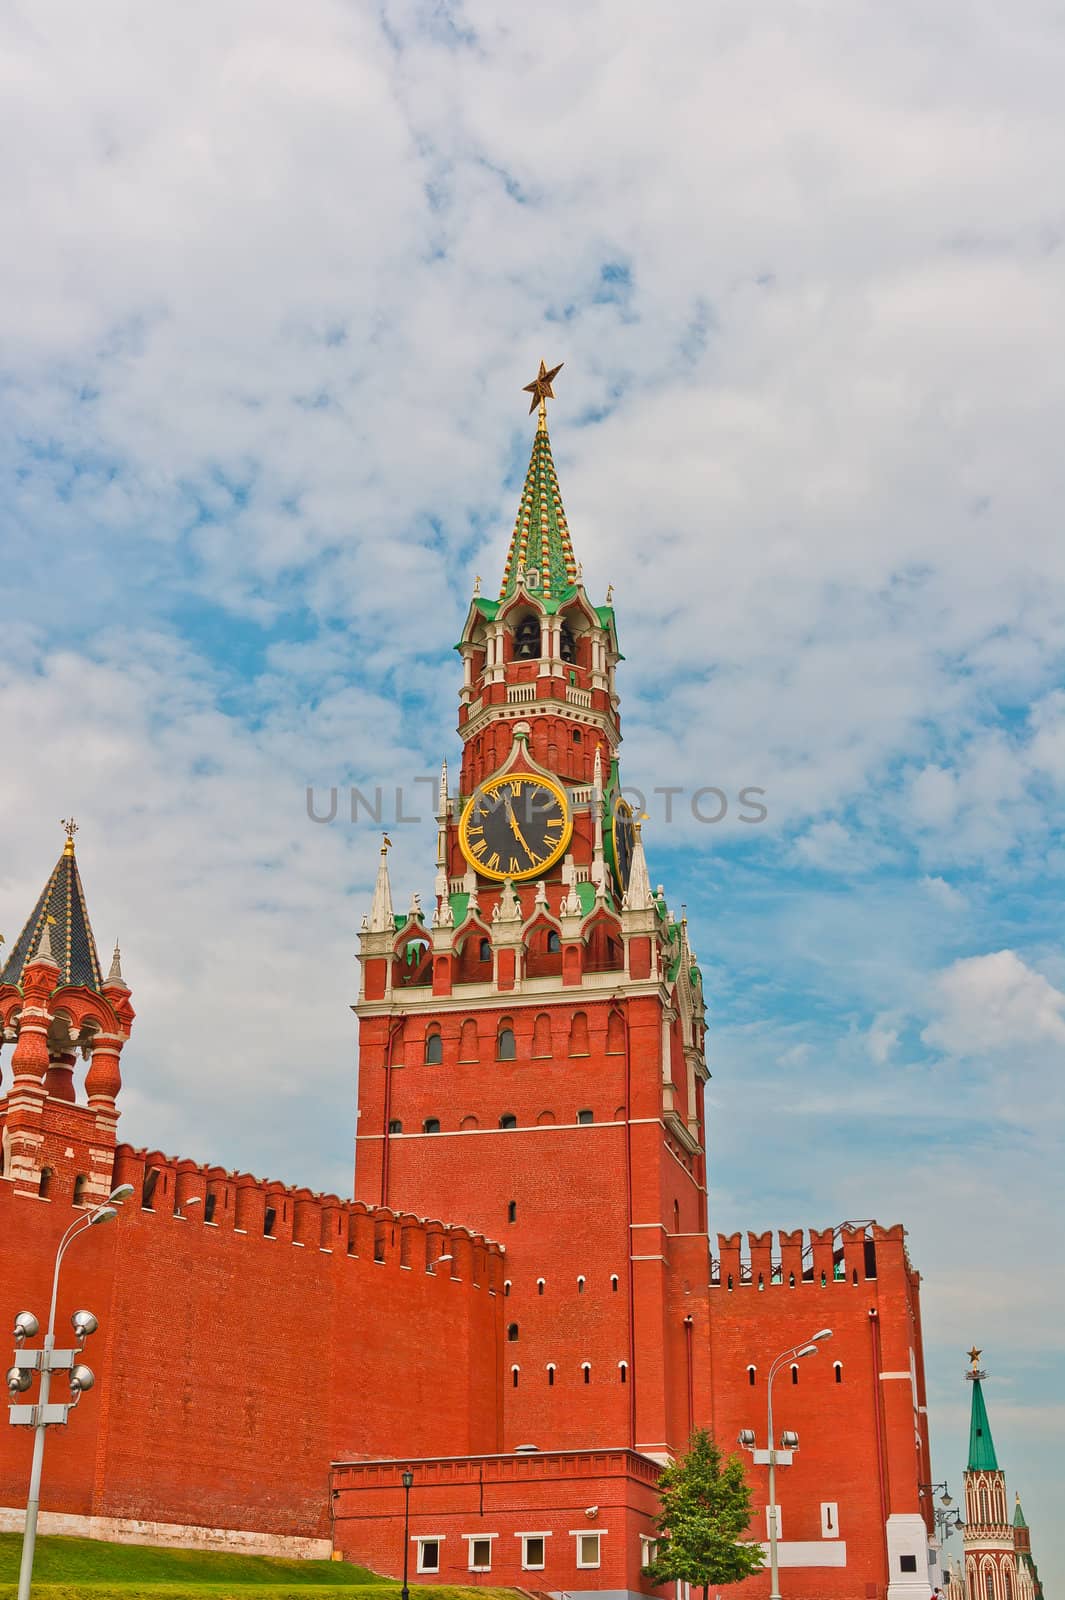 Old Moscow Kremlin in Russia, East Europe